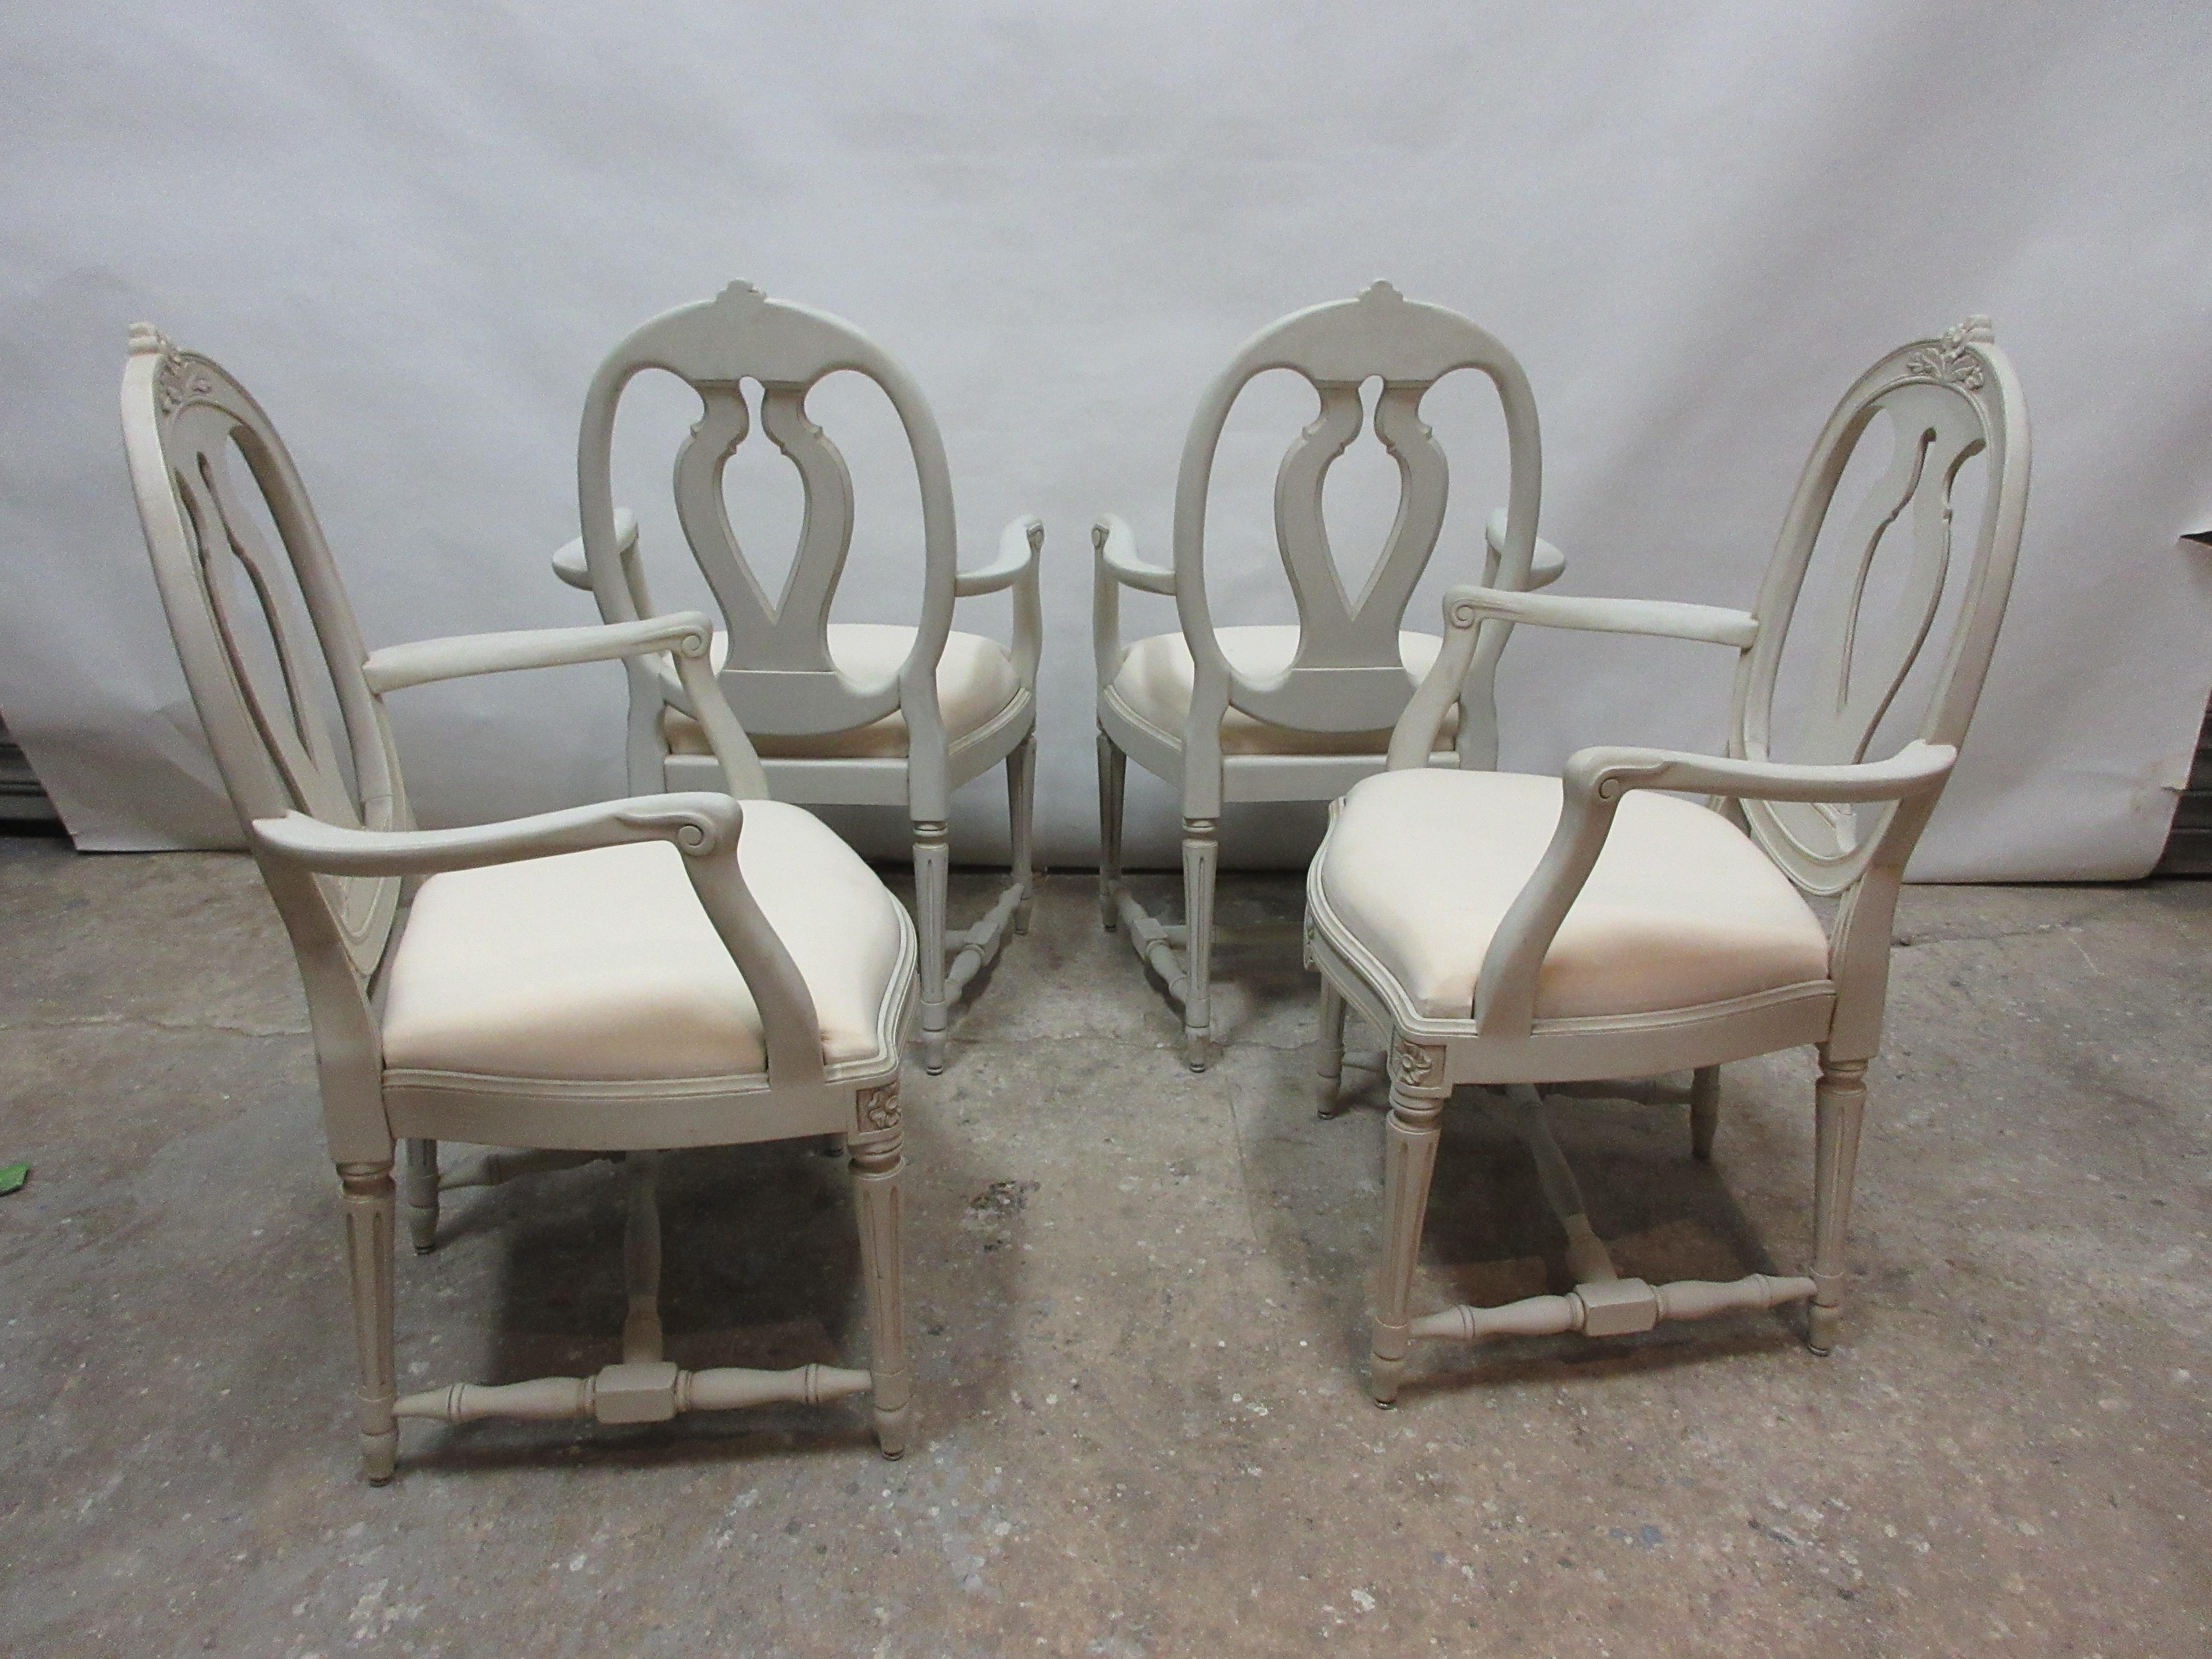 This is a set of 4 Swedish Gustavian armchairs. They have been restored and repainted with milk paints 